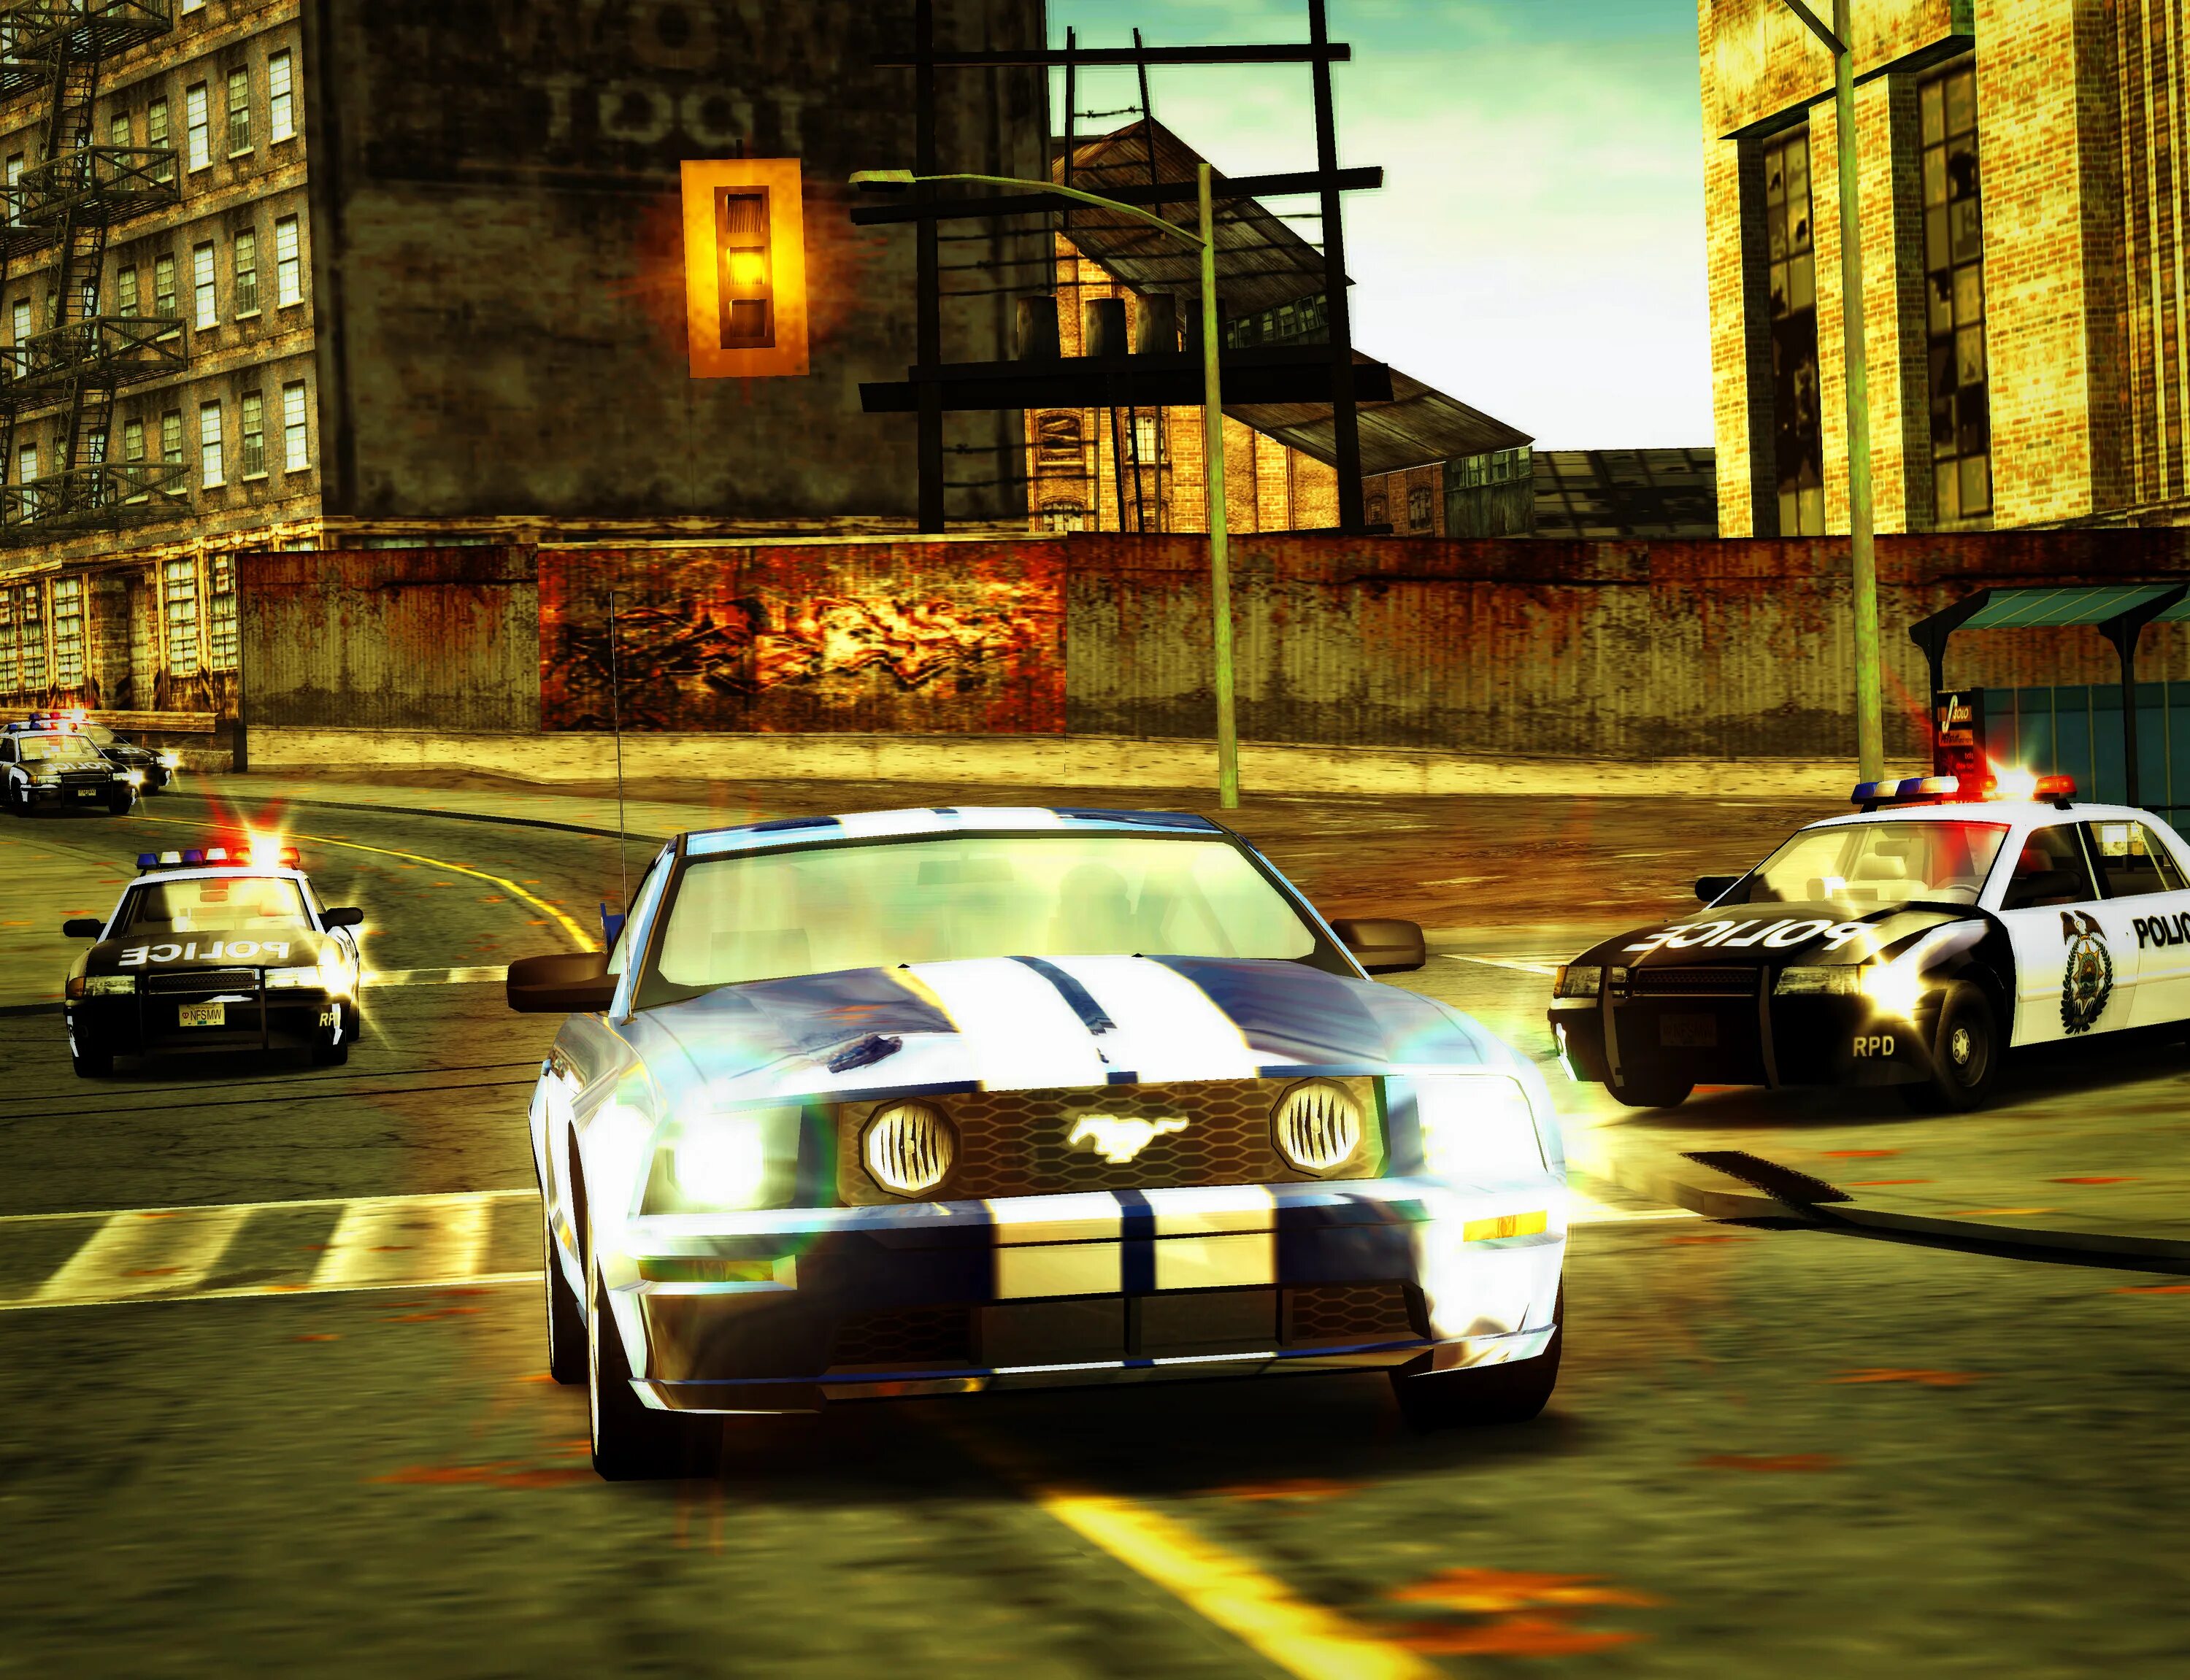 Need for Speed most wanted 2005. Нфс МВ 2005. Гонки NFS most wanted. Гонки NFS most wanted 2005. Музыка из мост вантед 2005